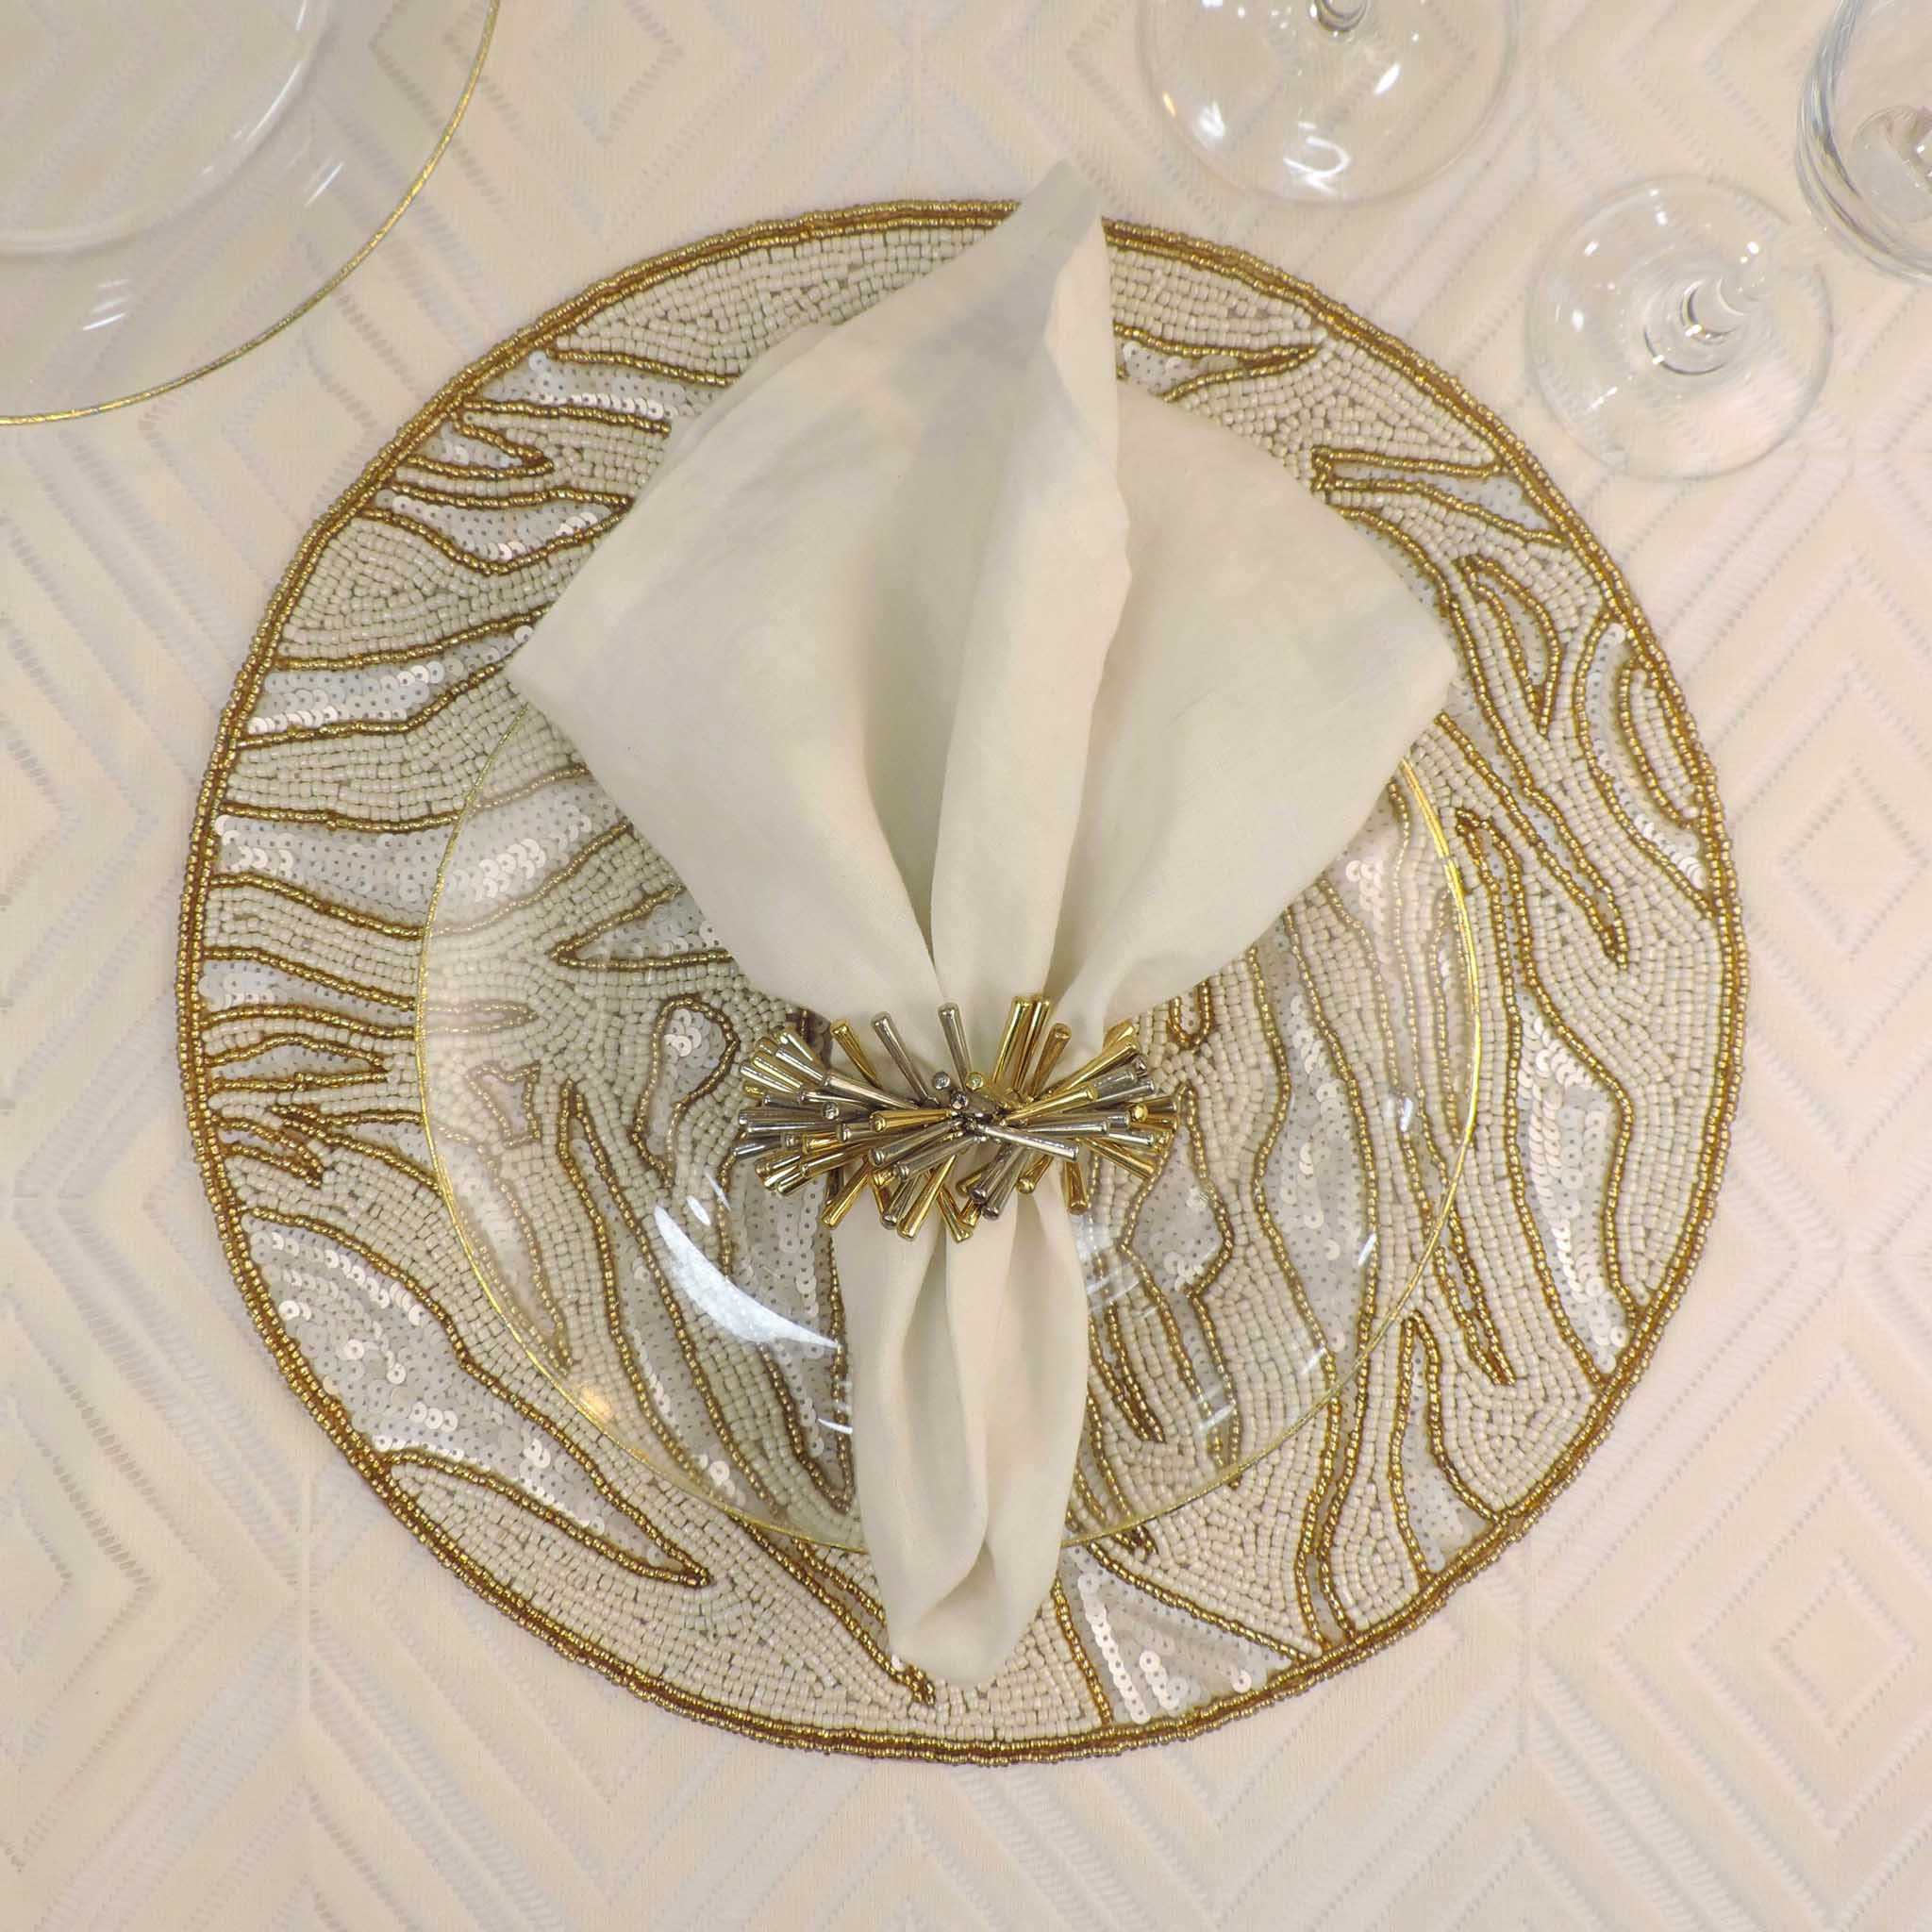 Modern Camo Glass Bead Embroidered Placemat in Cream & Gold, Set of 2/4